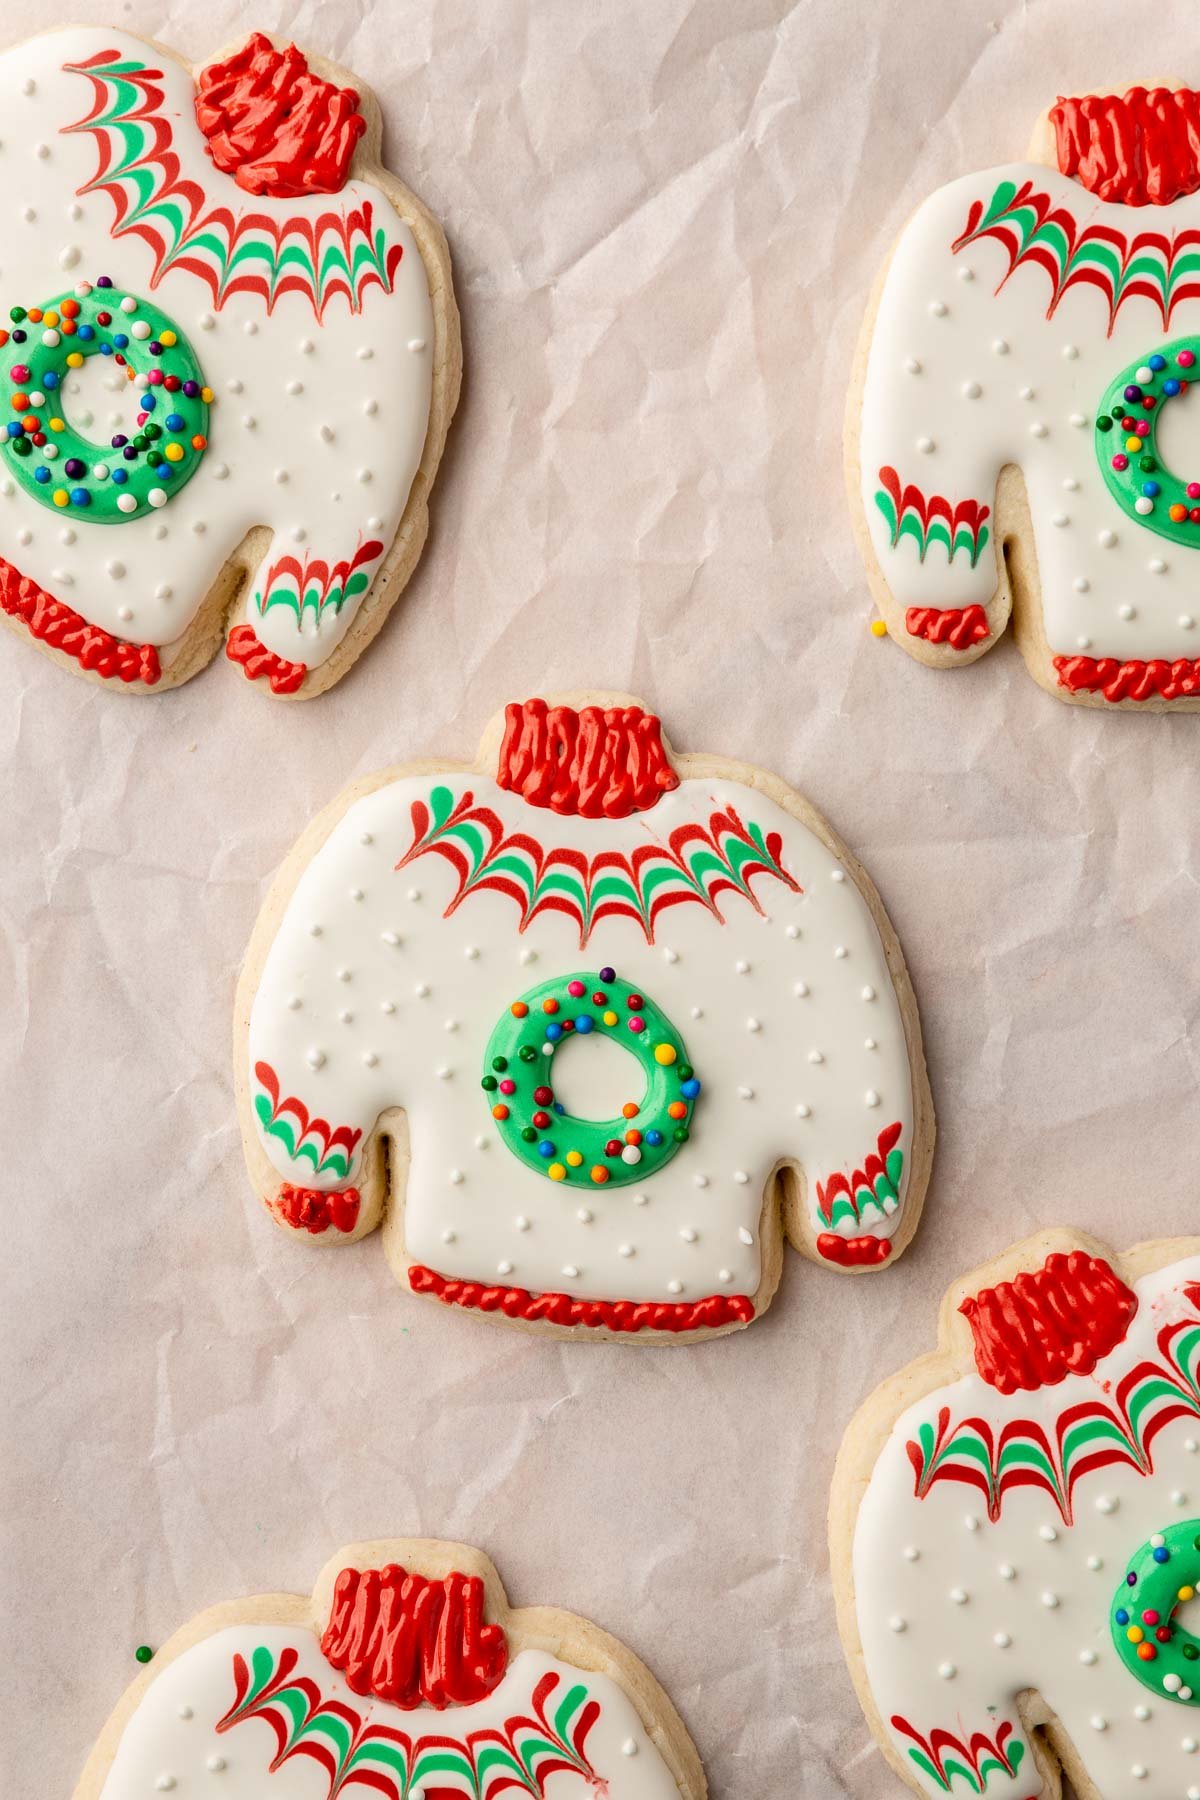 A gluten free ugly sweater sugar cookie with white royal icing and red and green chevron stripes with a green wreath in the center sprinkled with rainbow nonpareil sprinkles.